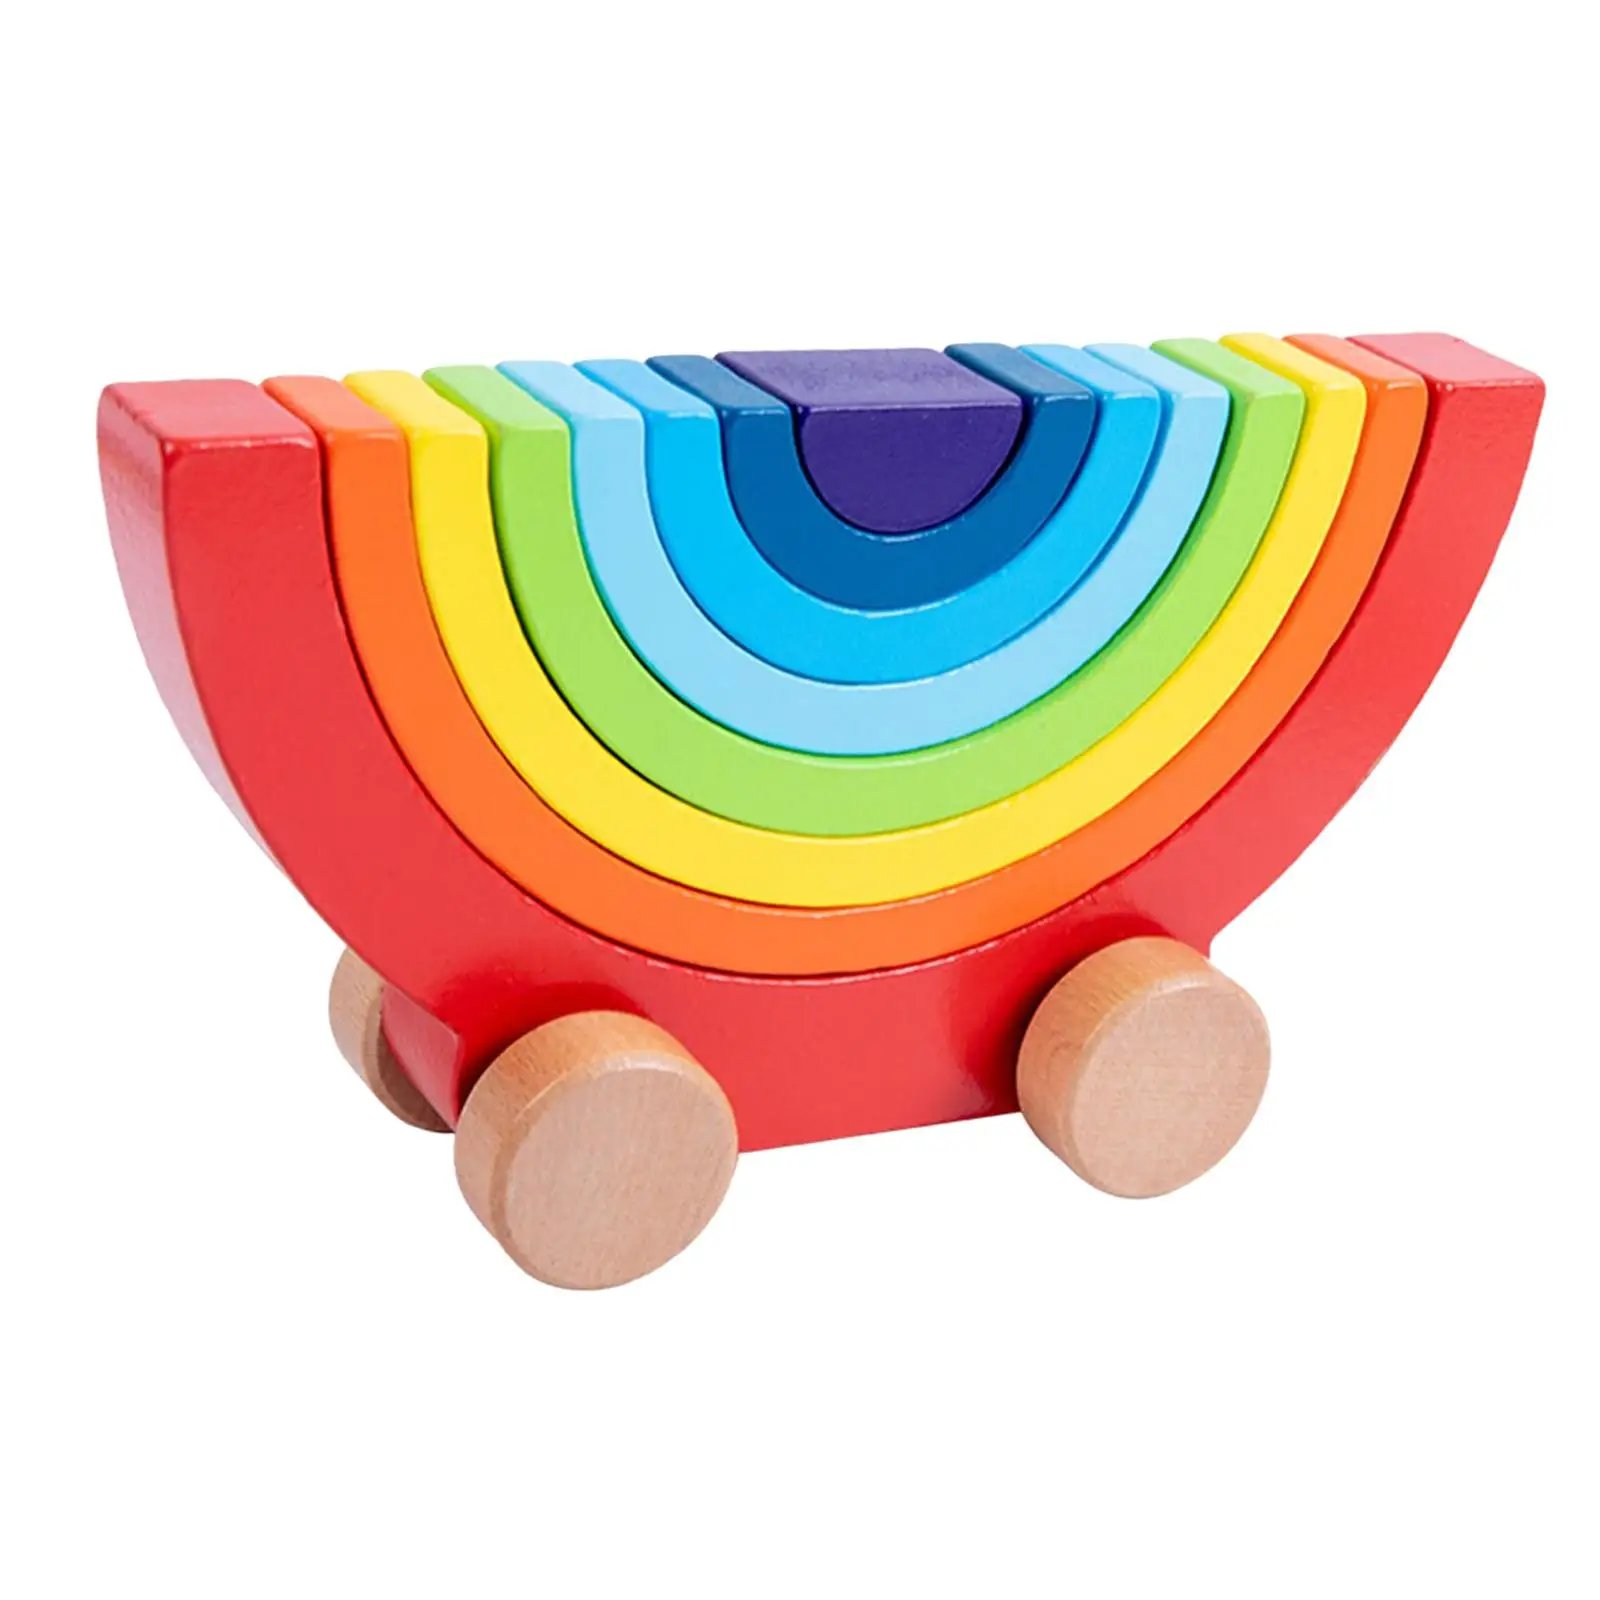 1 Set Wooden Building Blocks Car Toy Stacking Puzzle Gift Development Colorful